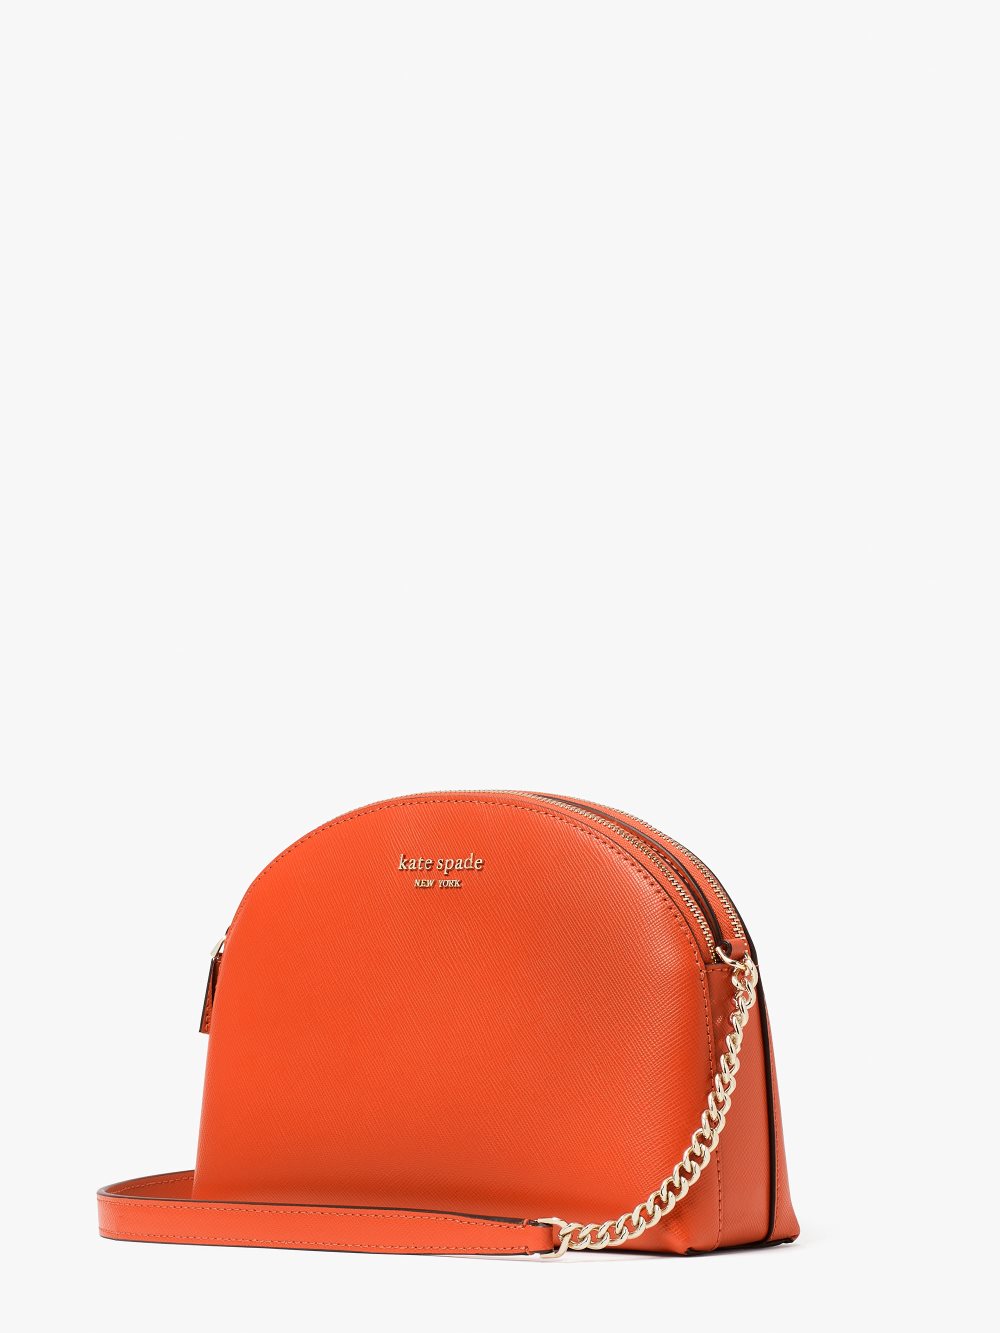 Women's dried apricot spencer double-zip dome crossbody | Kate Spade